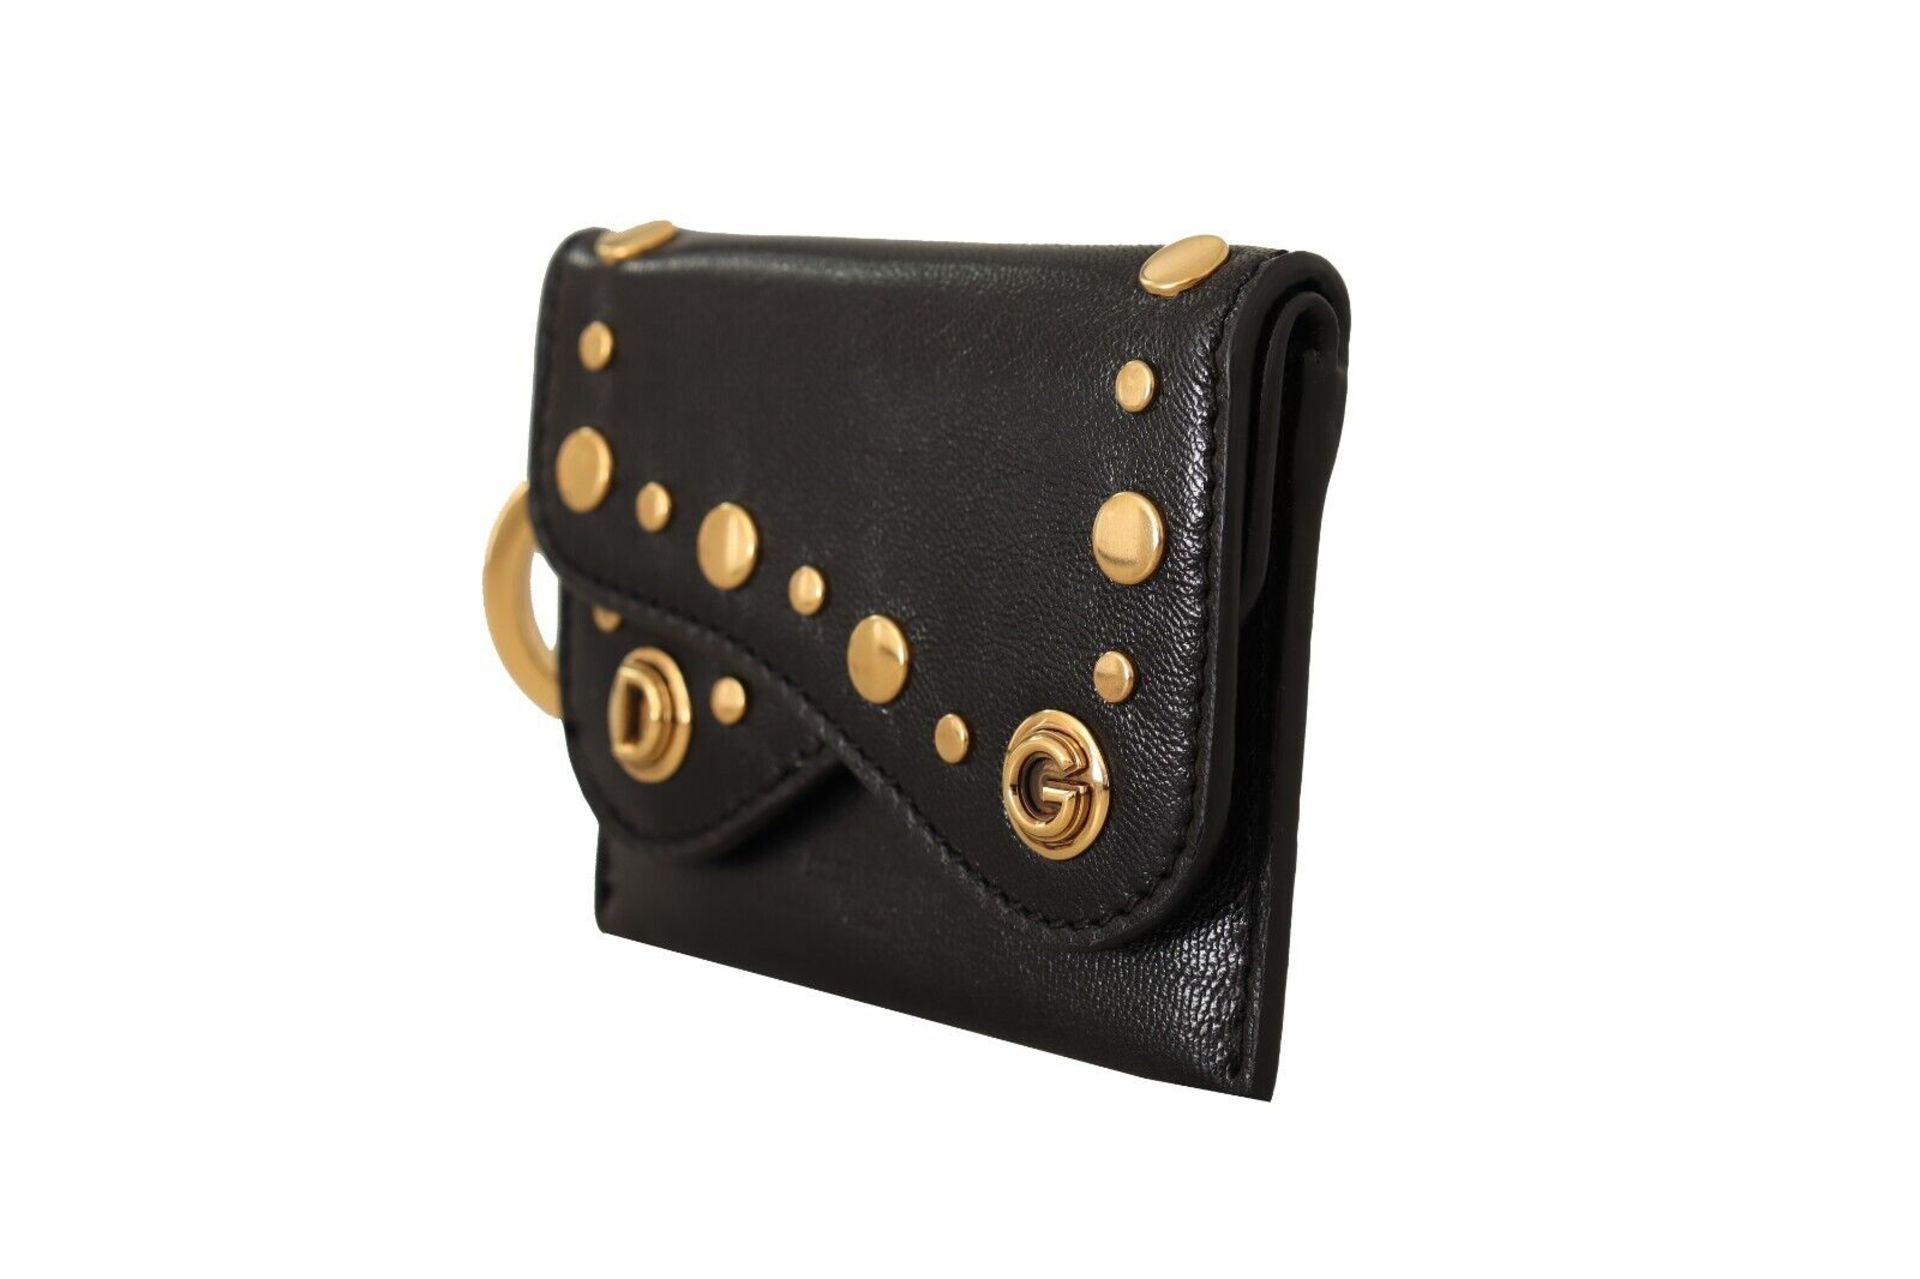 BLACK LEATHER MINI BIFOLD STUDDED KEYCHAIN WALLET - Image 4 of 9